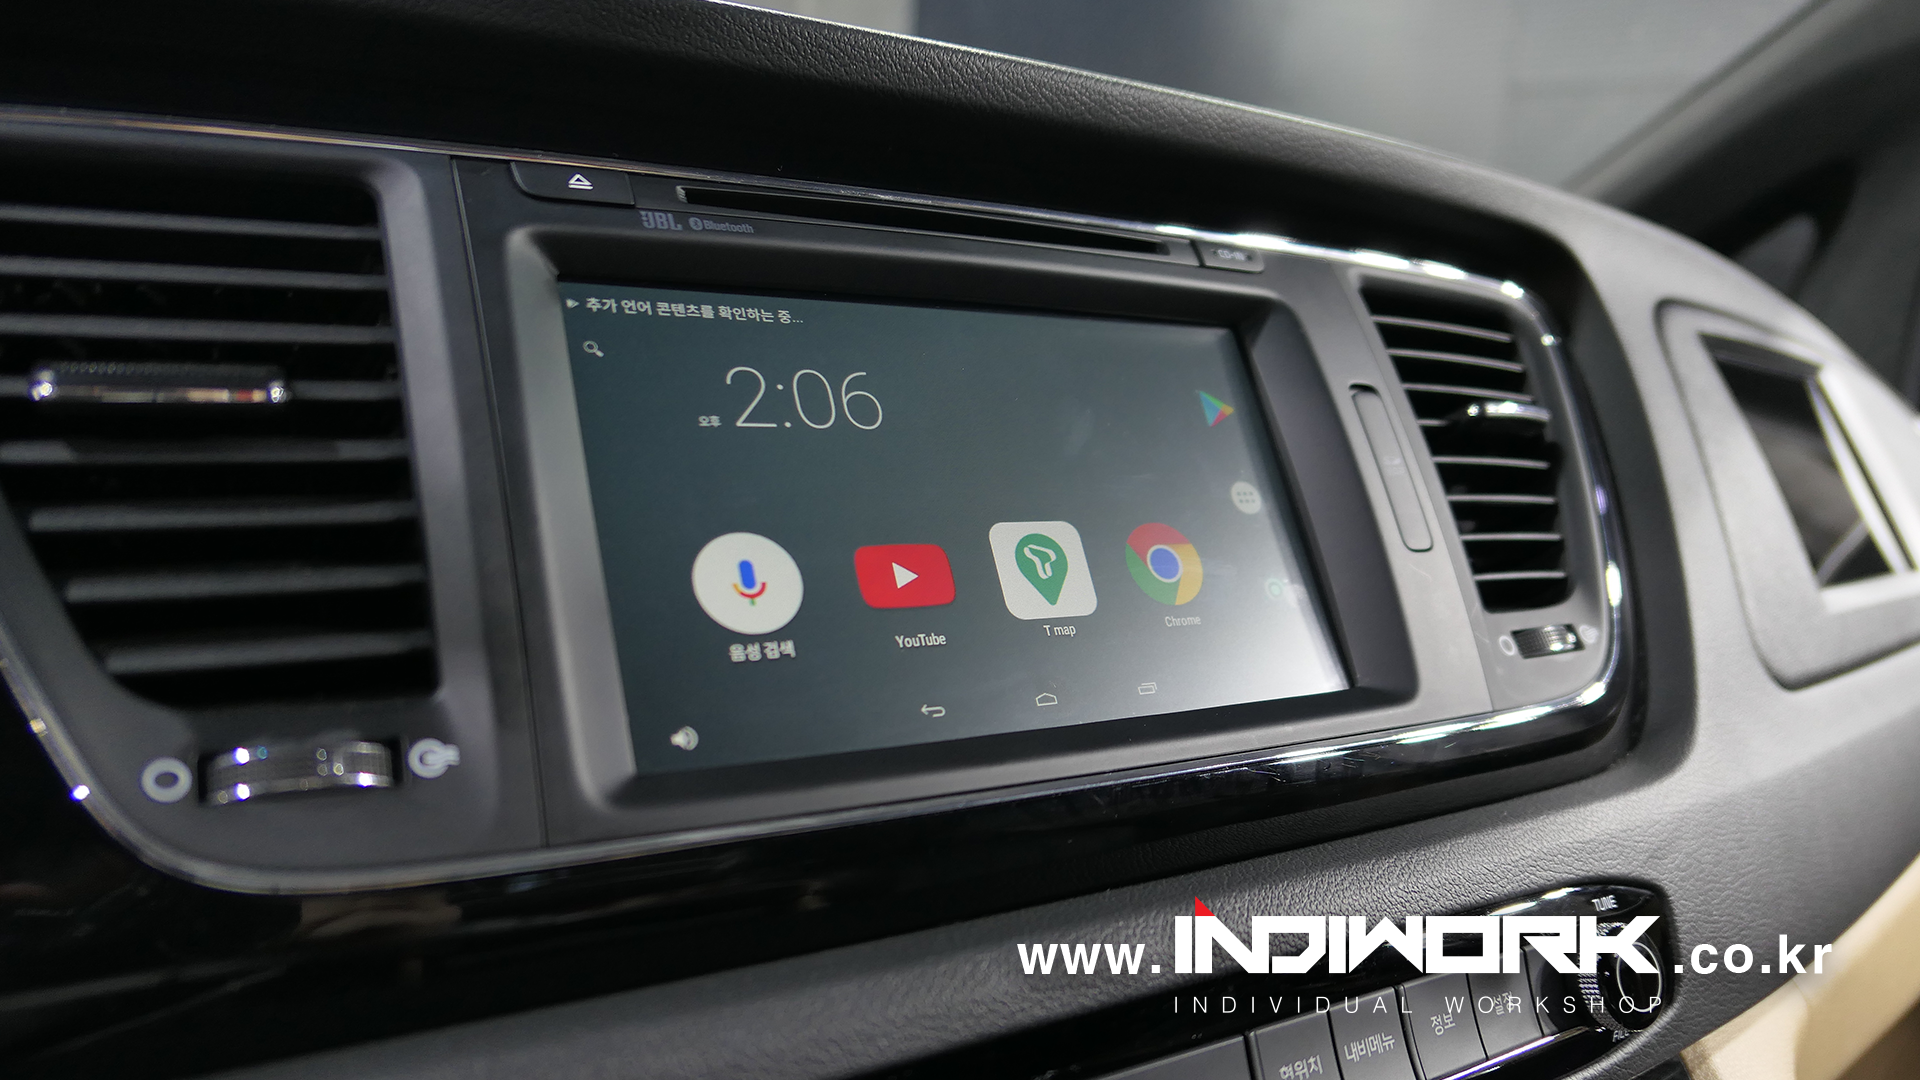 Android system for 2017 KIA Carnival "M2C-100"